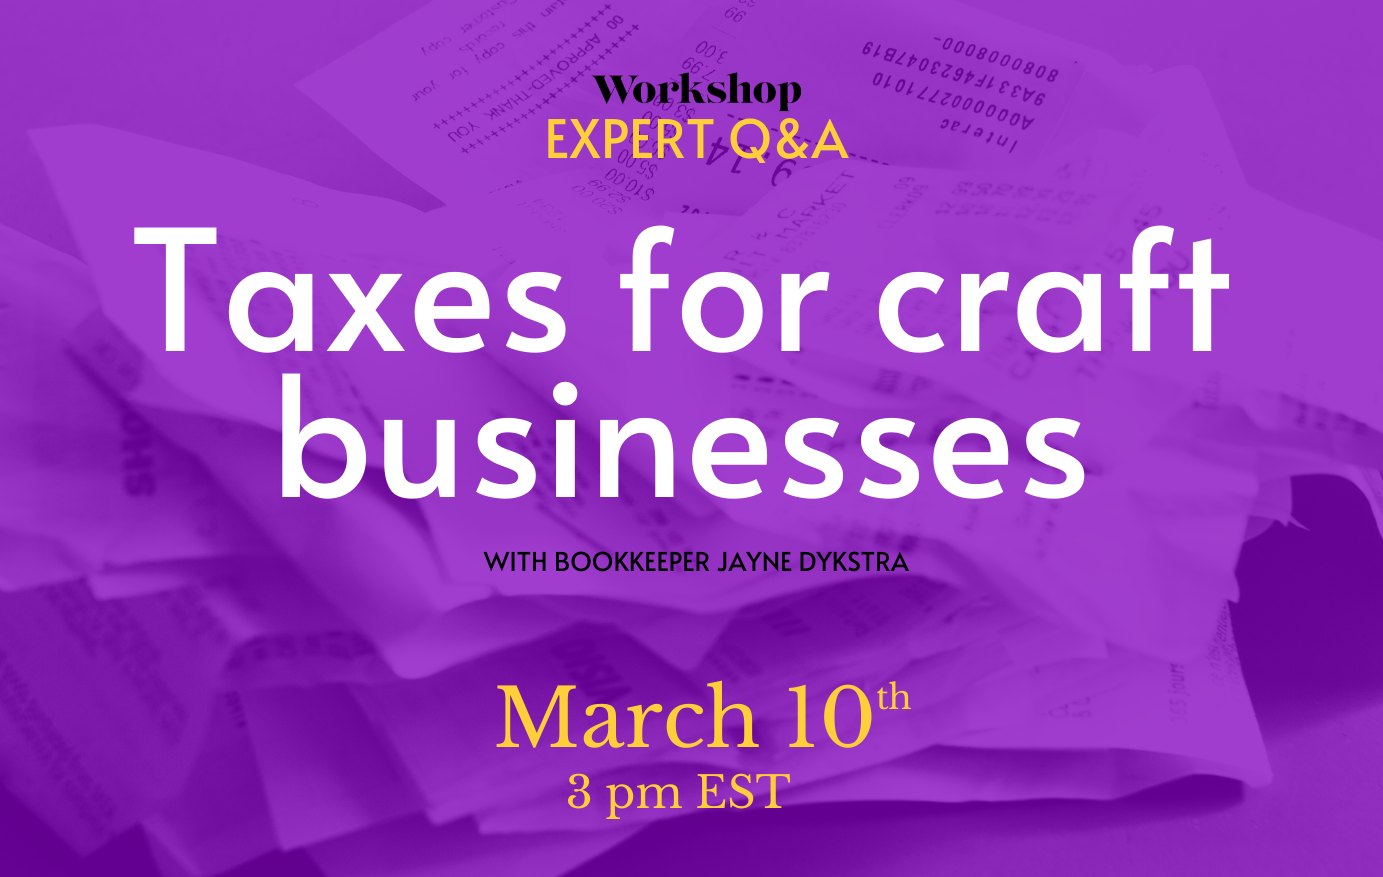 purple image with text: Taxes for craft businesses with bookkeeper Jayne Dykstra, March 10, 3 pm EST